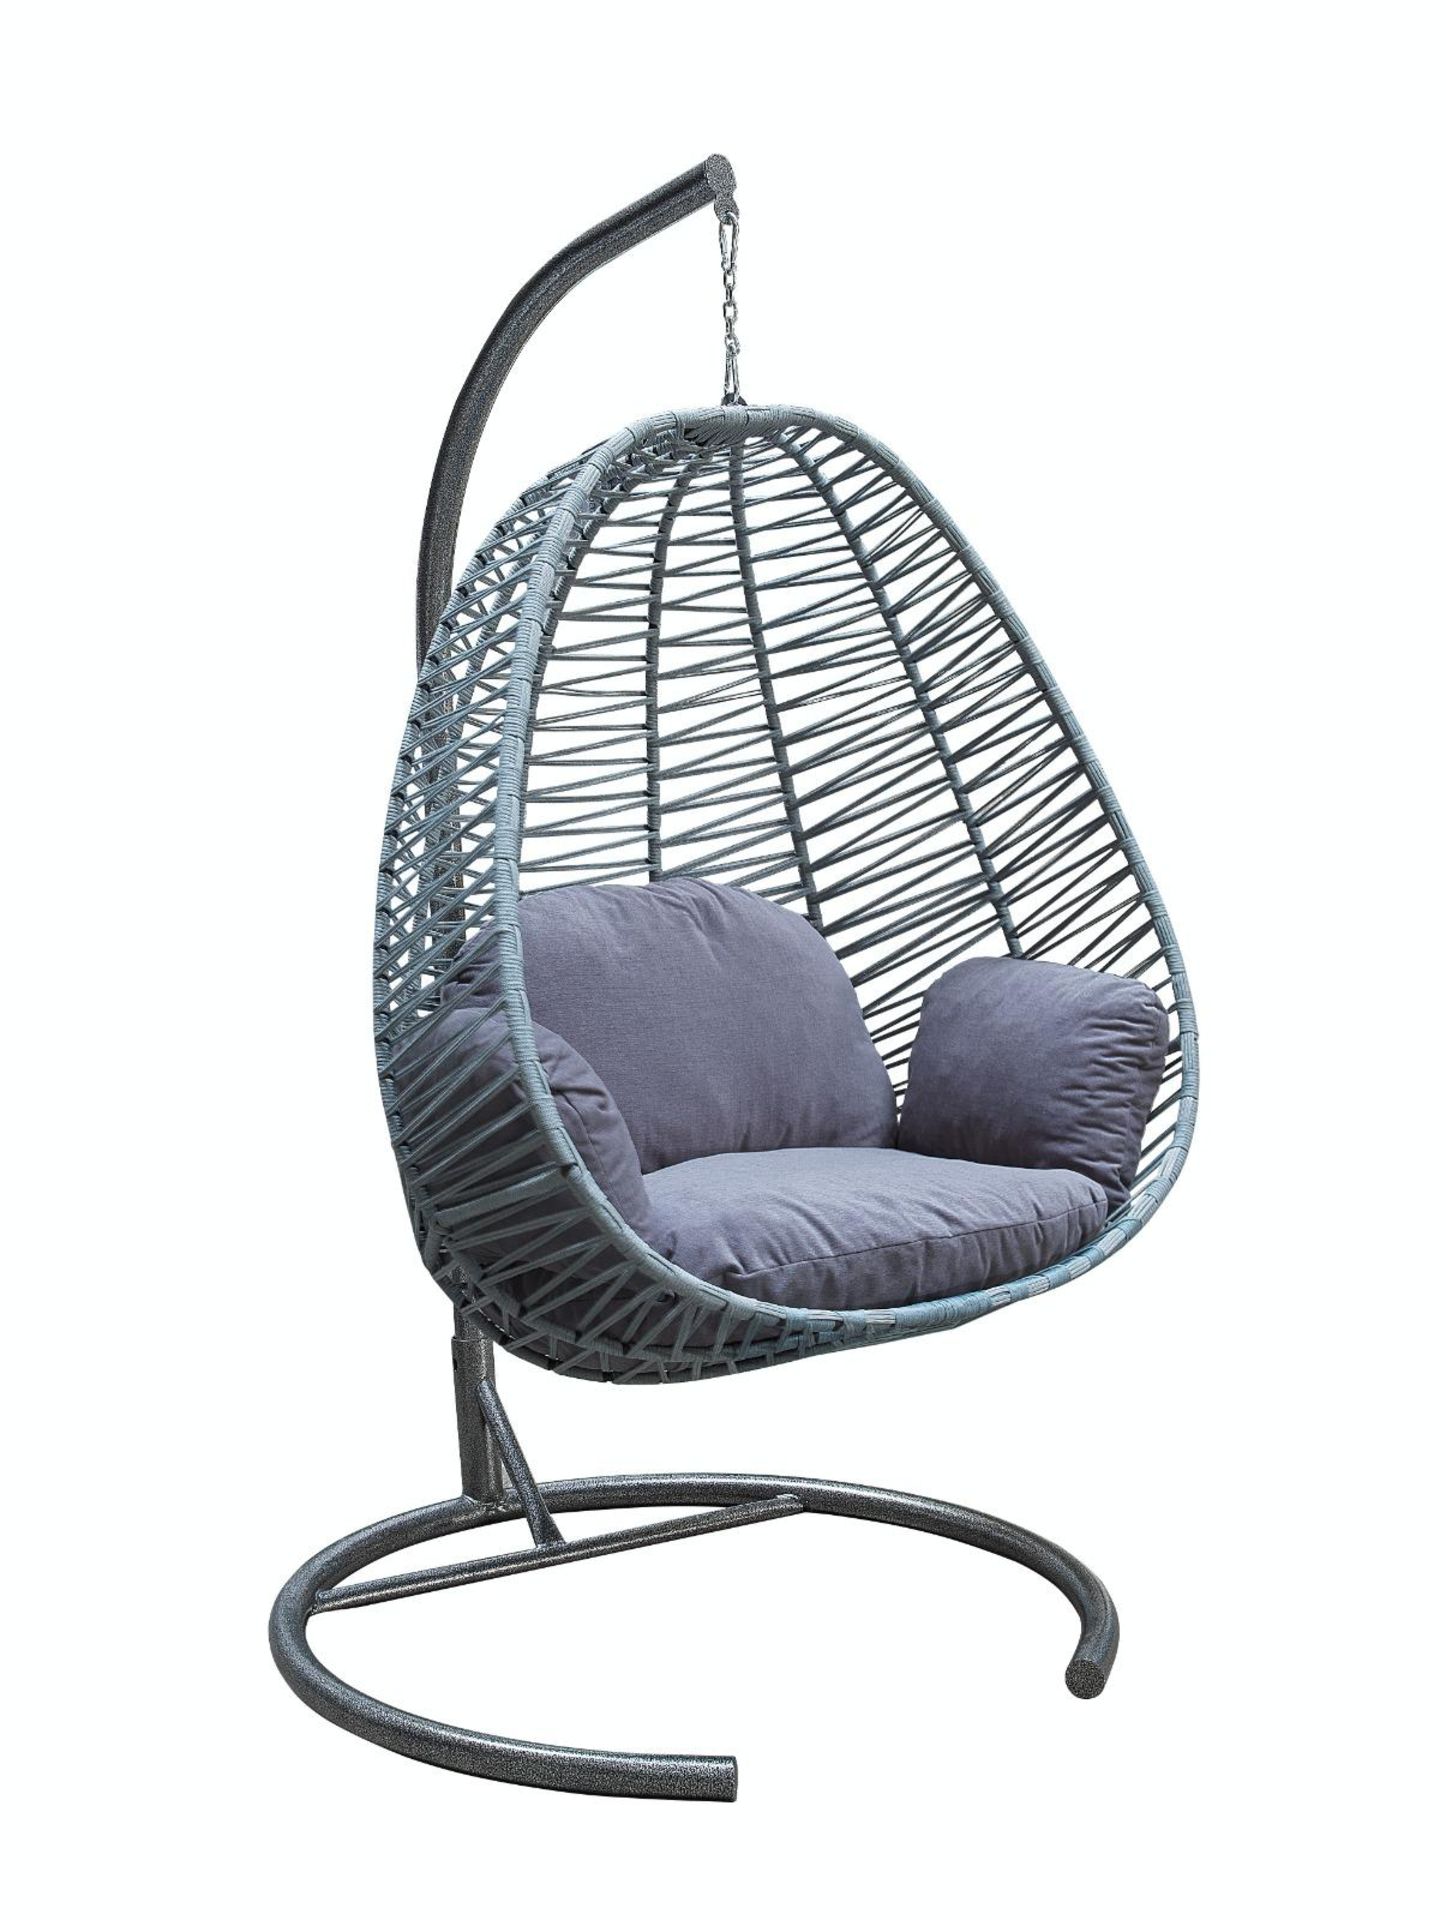 x3 New Dark Grey Luxury Weaved Hanging Egg With Cushion (Similar Chairs £250 to £400)